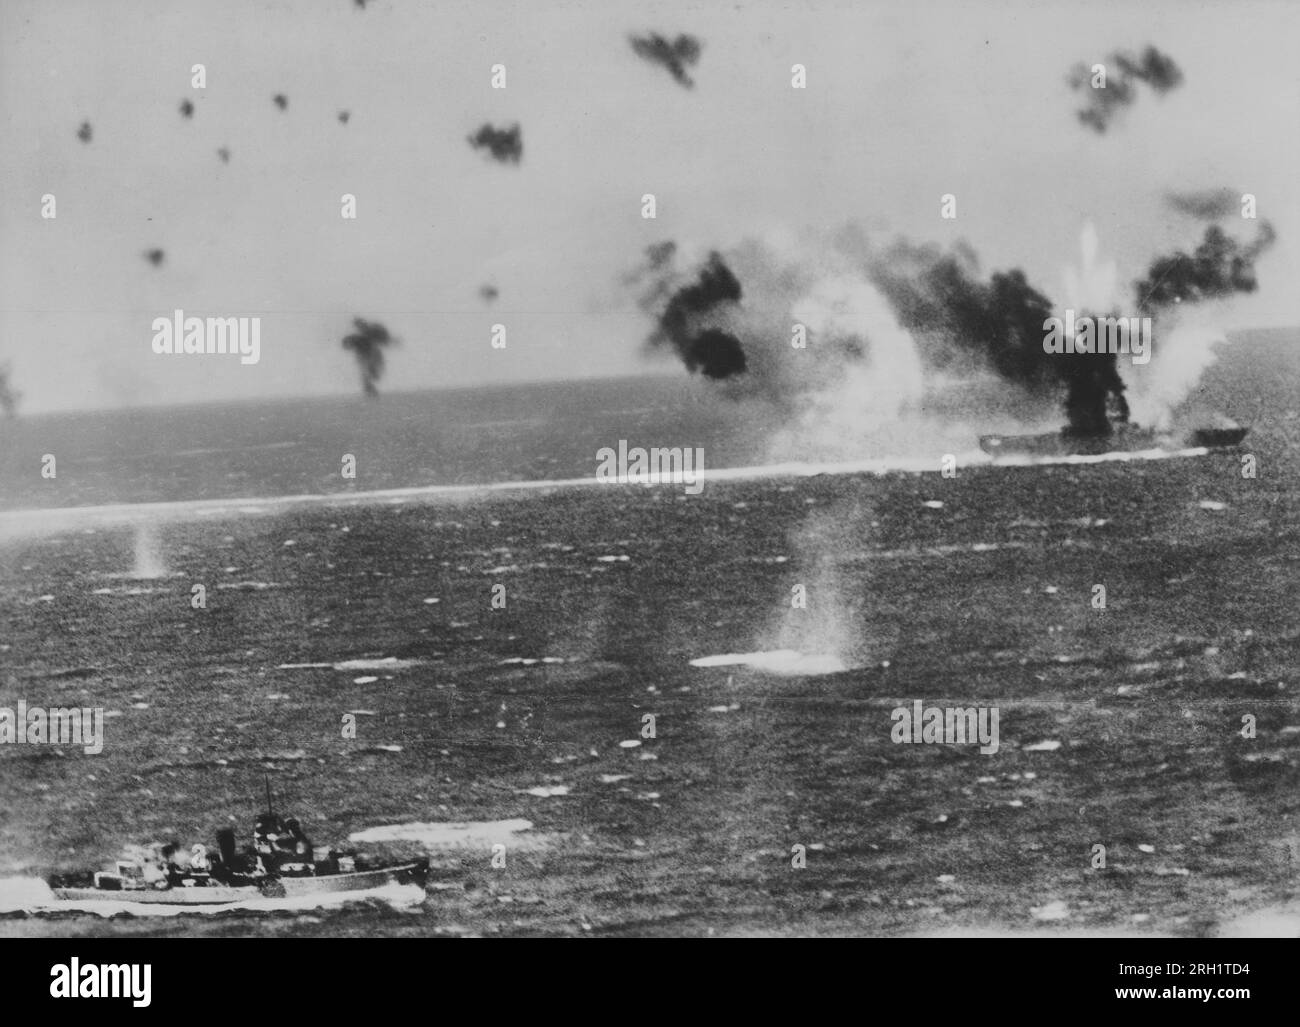 Battle of the Coral Sea, May 4-8 1942. Smoke billows from the United States Navy aircraft carrier USS Lexington after she was struck with bombs from Imperial Japanese Navy carrier aircraft, May 8 1942. Stock Photo